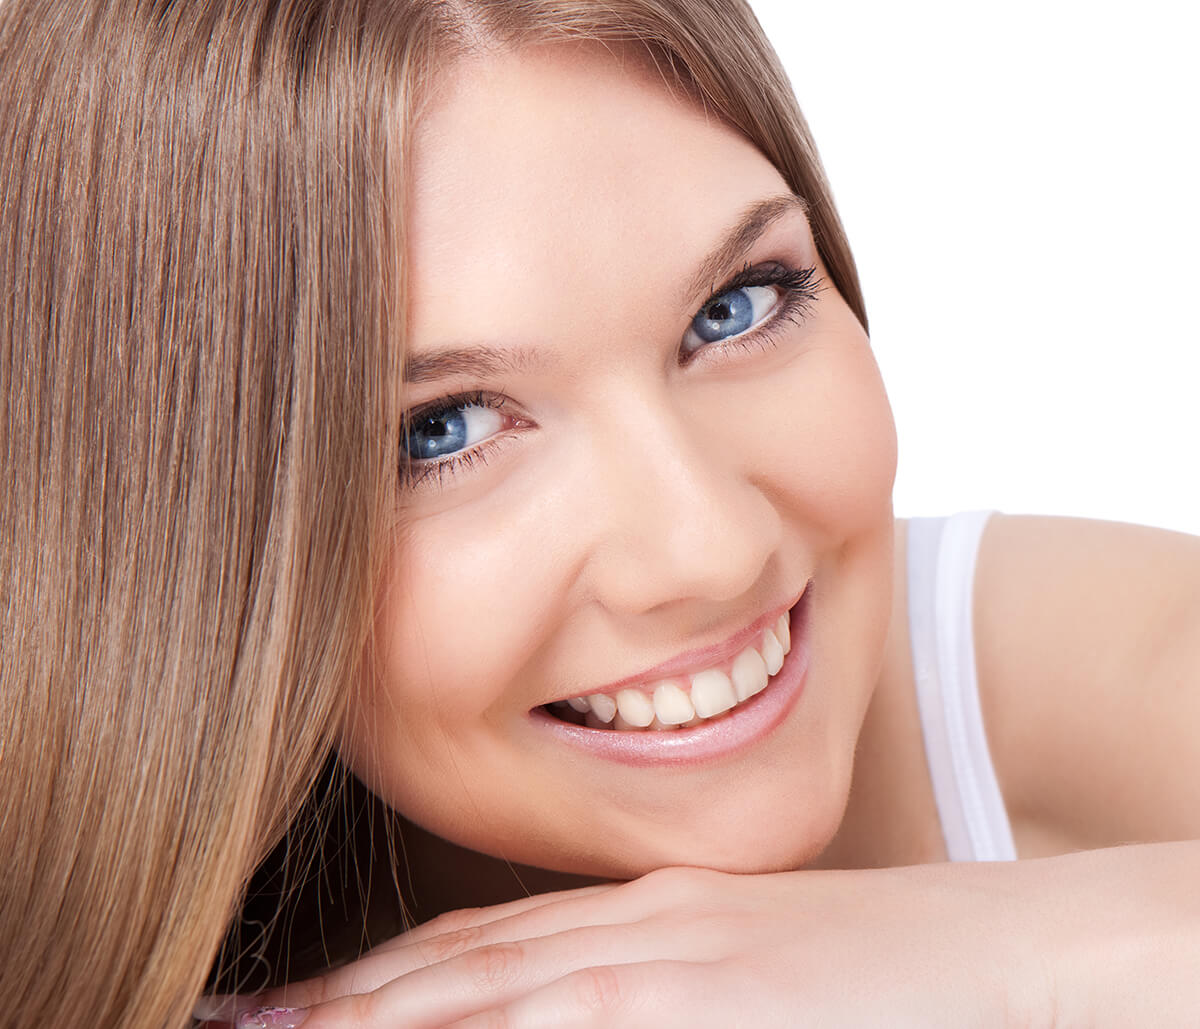 What Are the Benefits of Cosmetic Dental Treatments in Houston, TX Area